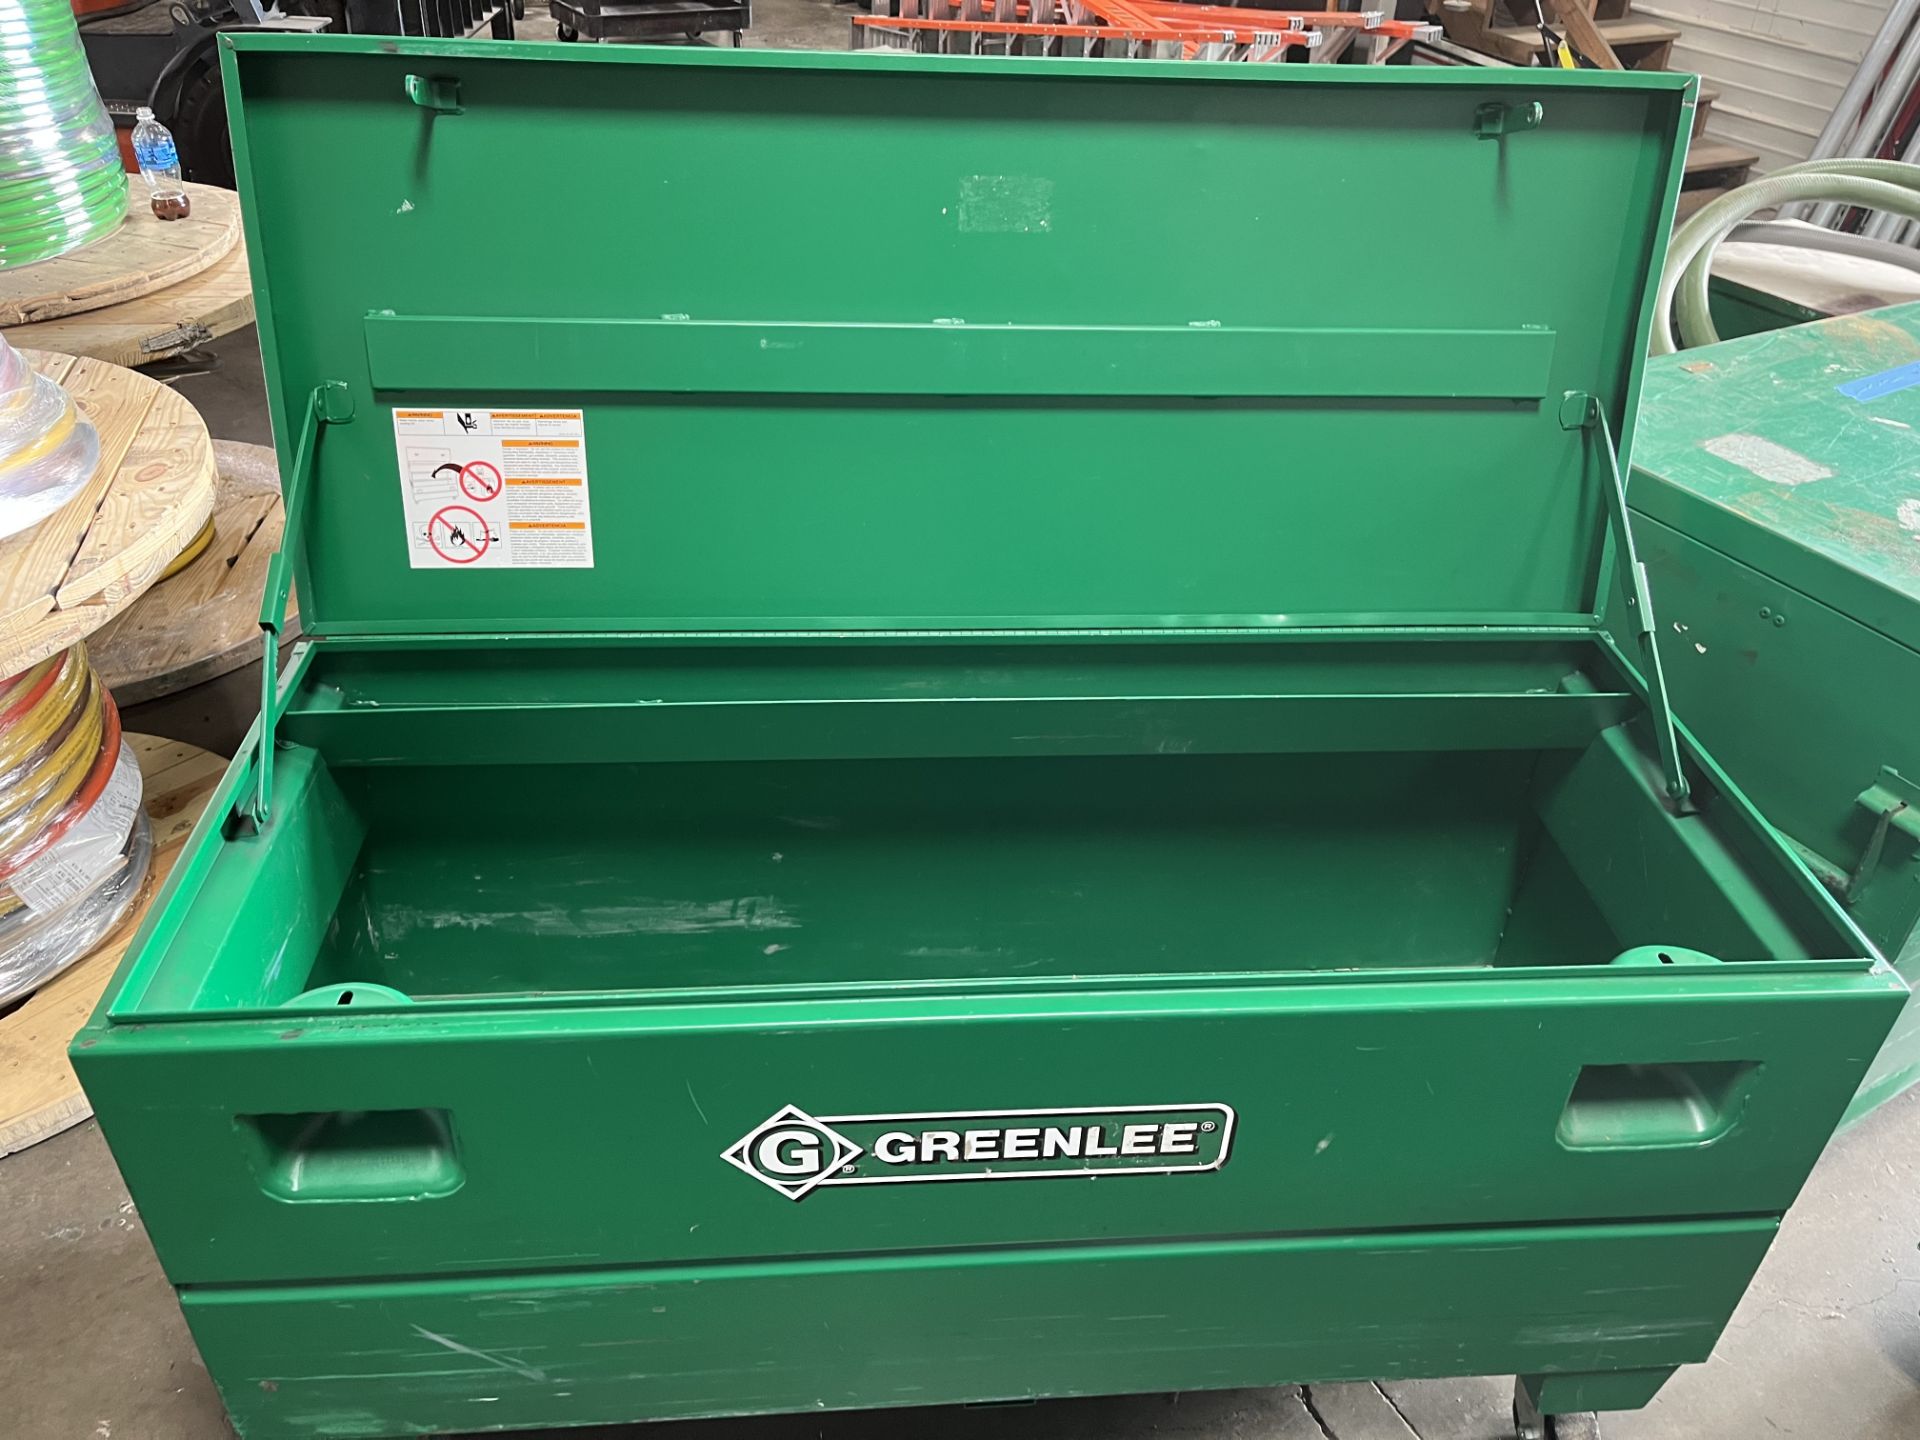 Greenlee 24" X 60" X 24" Job Box on casters Model 2460/23363 - Image 2 of 2